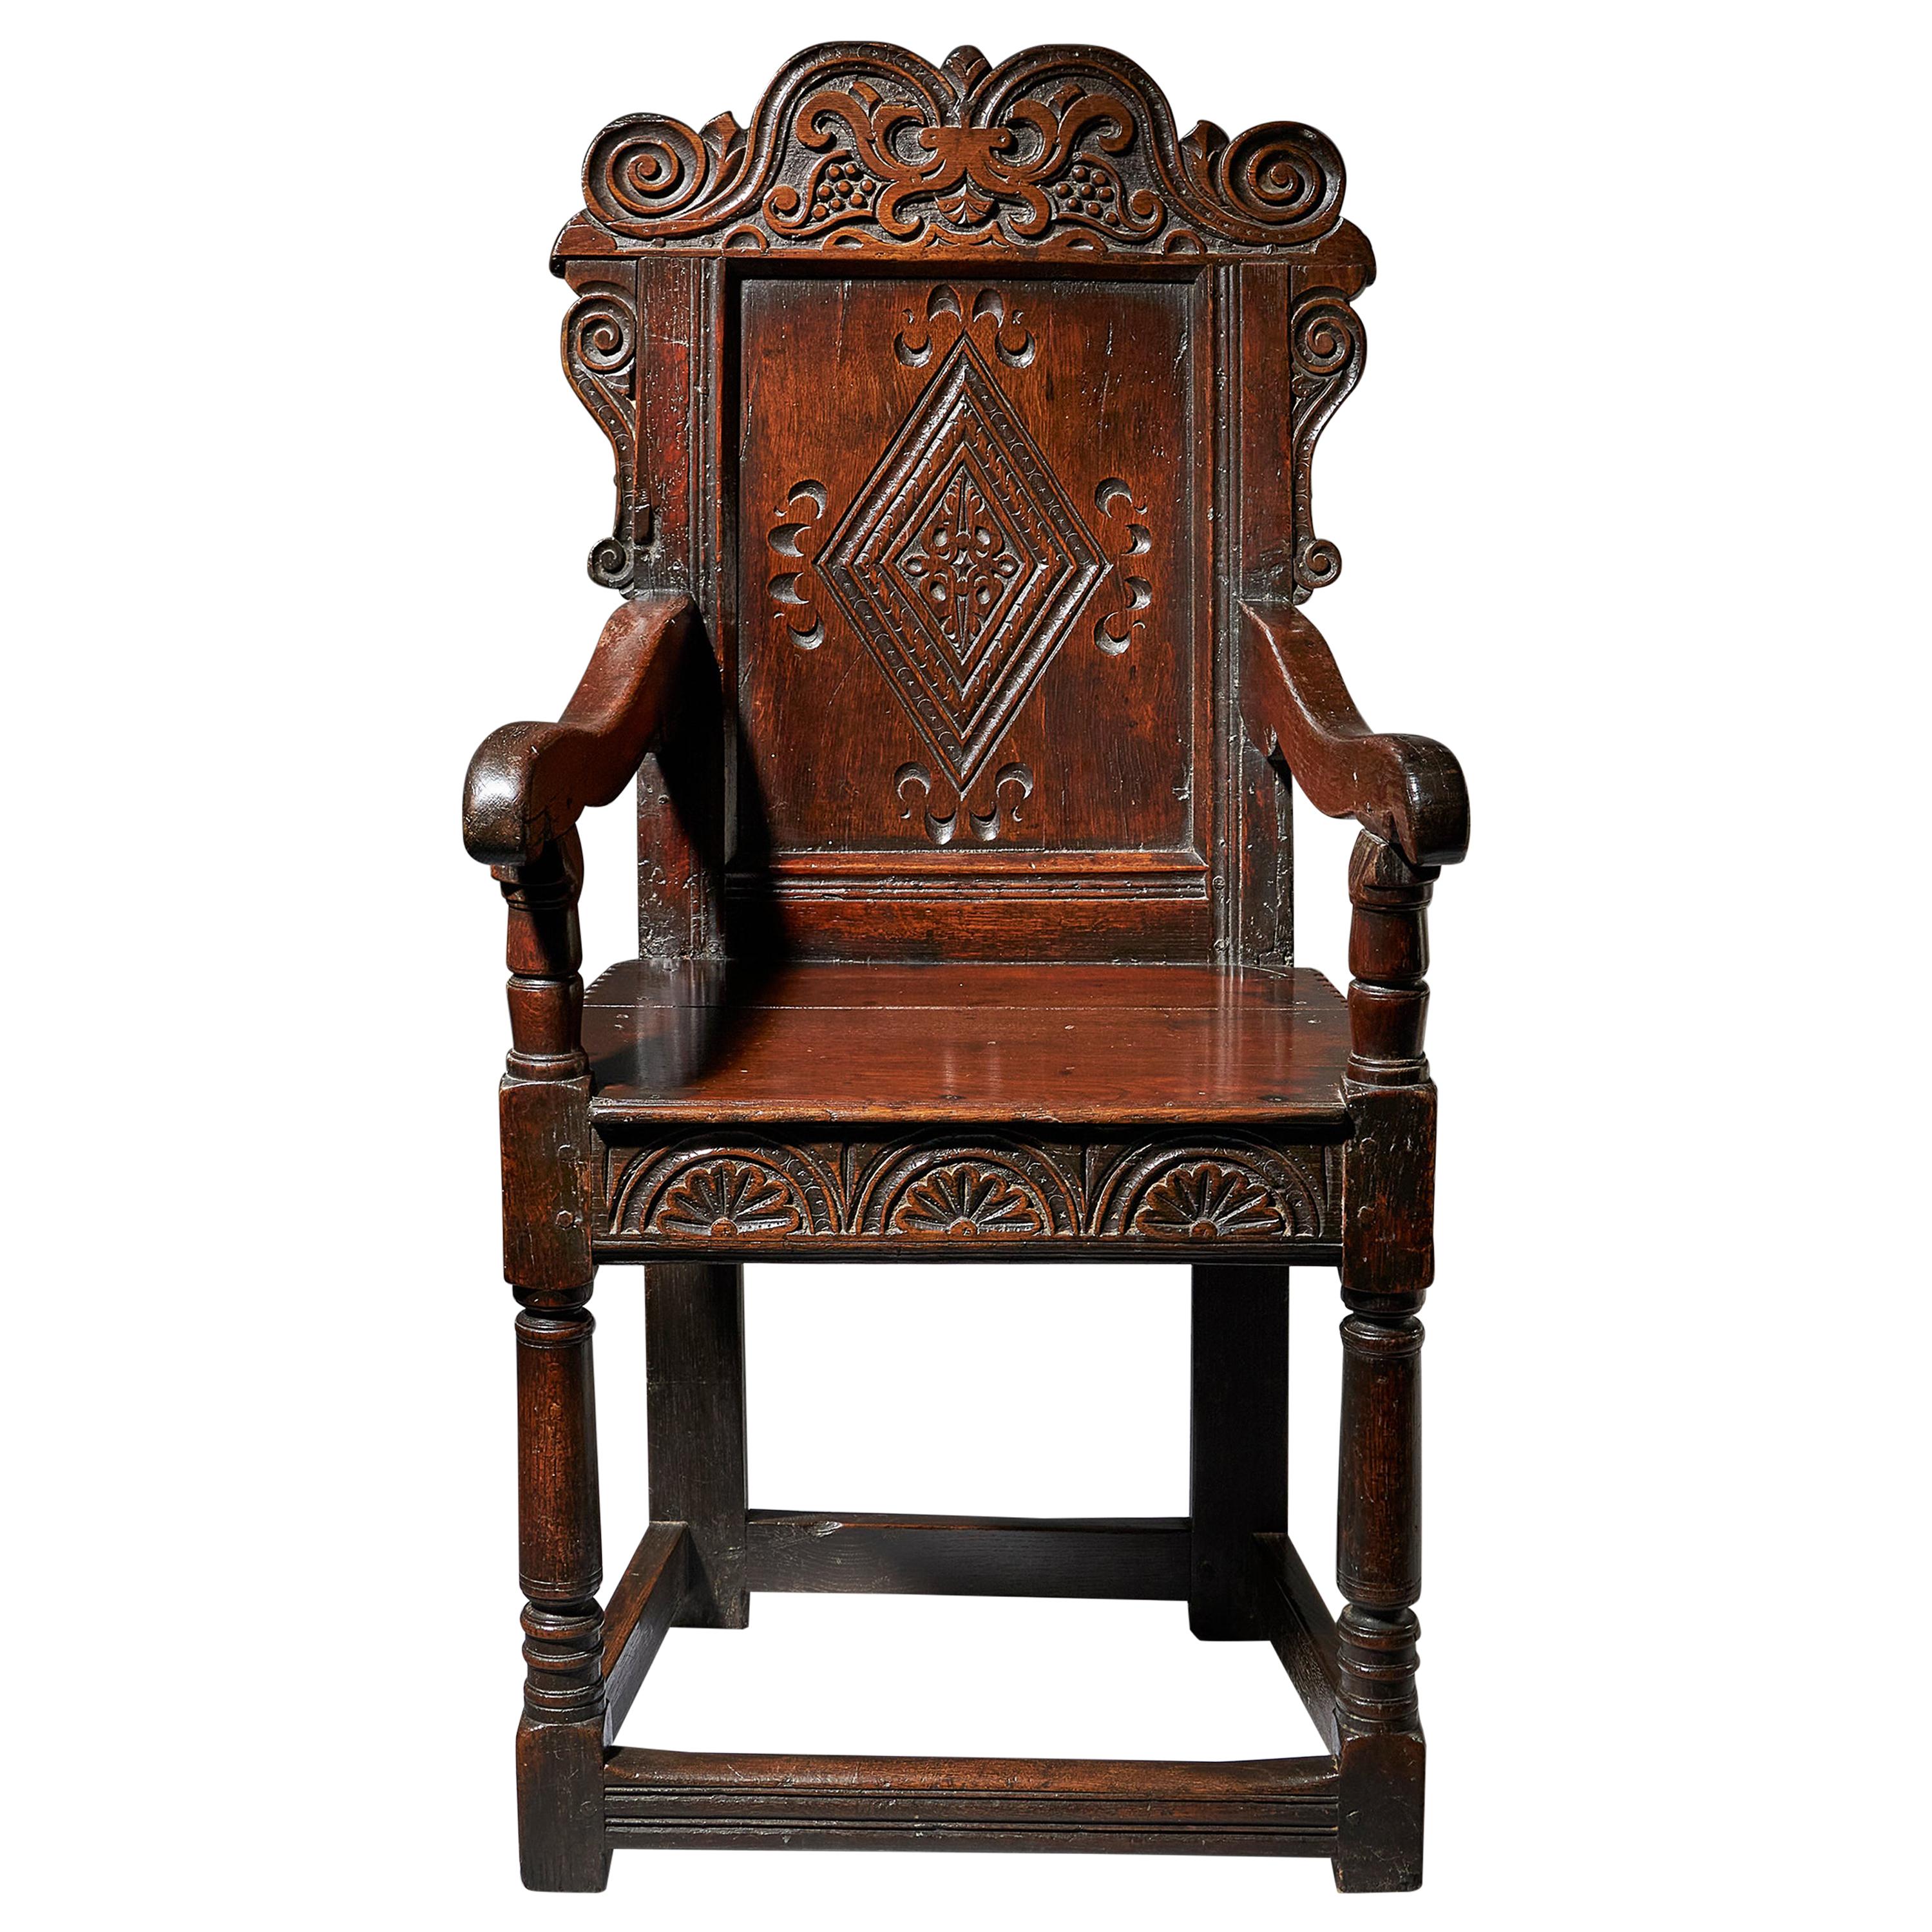 17th Century Carved Oak Wainscot Chair, the Yorkshire Chair